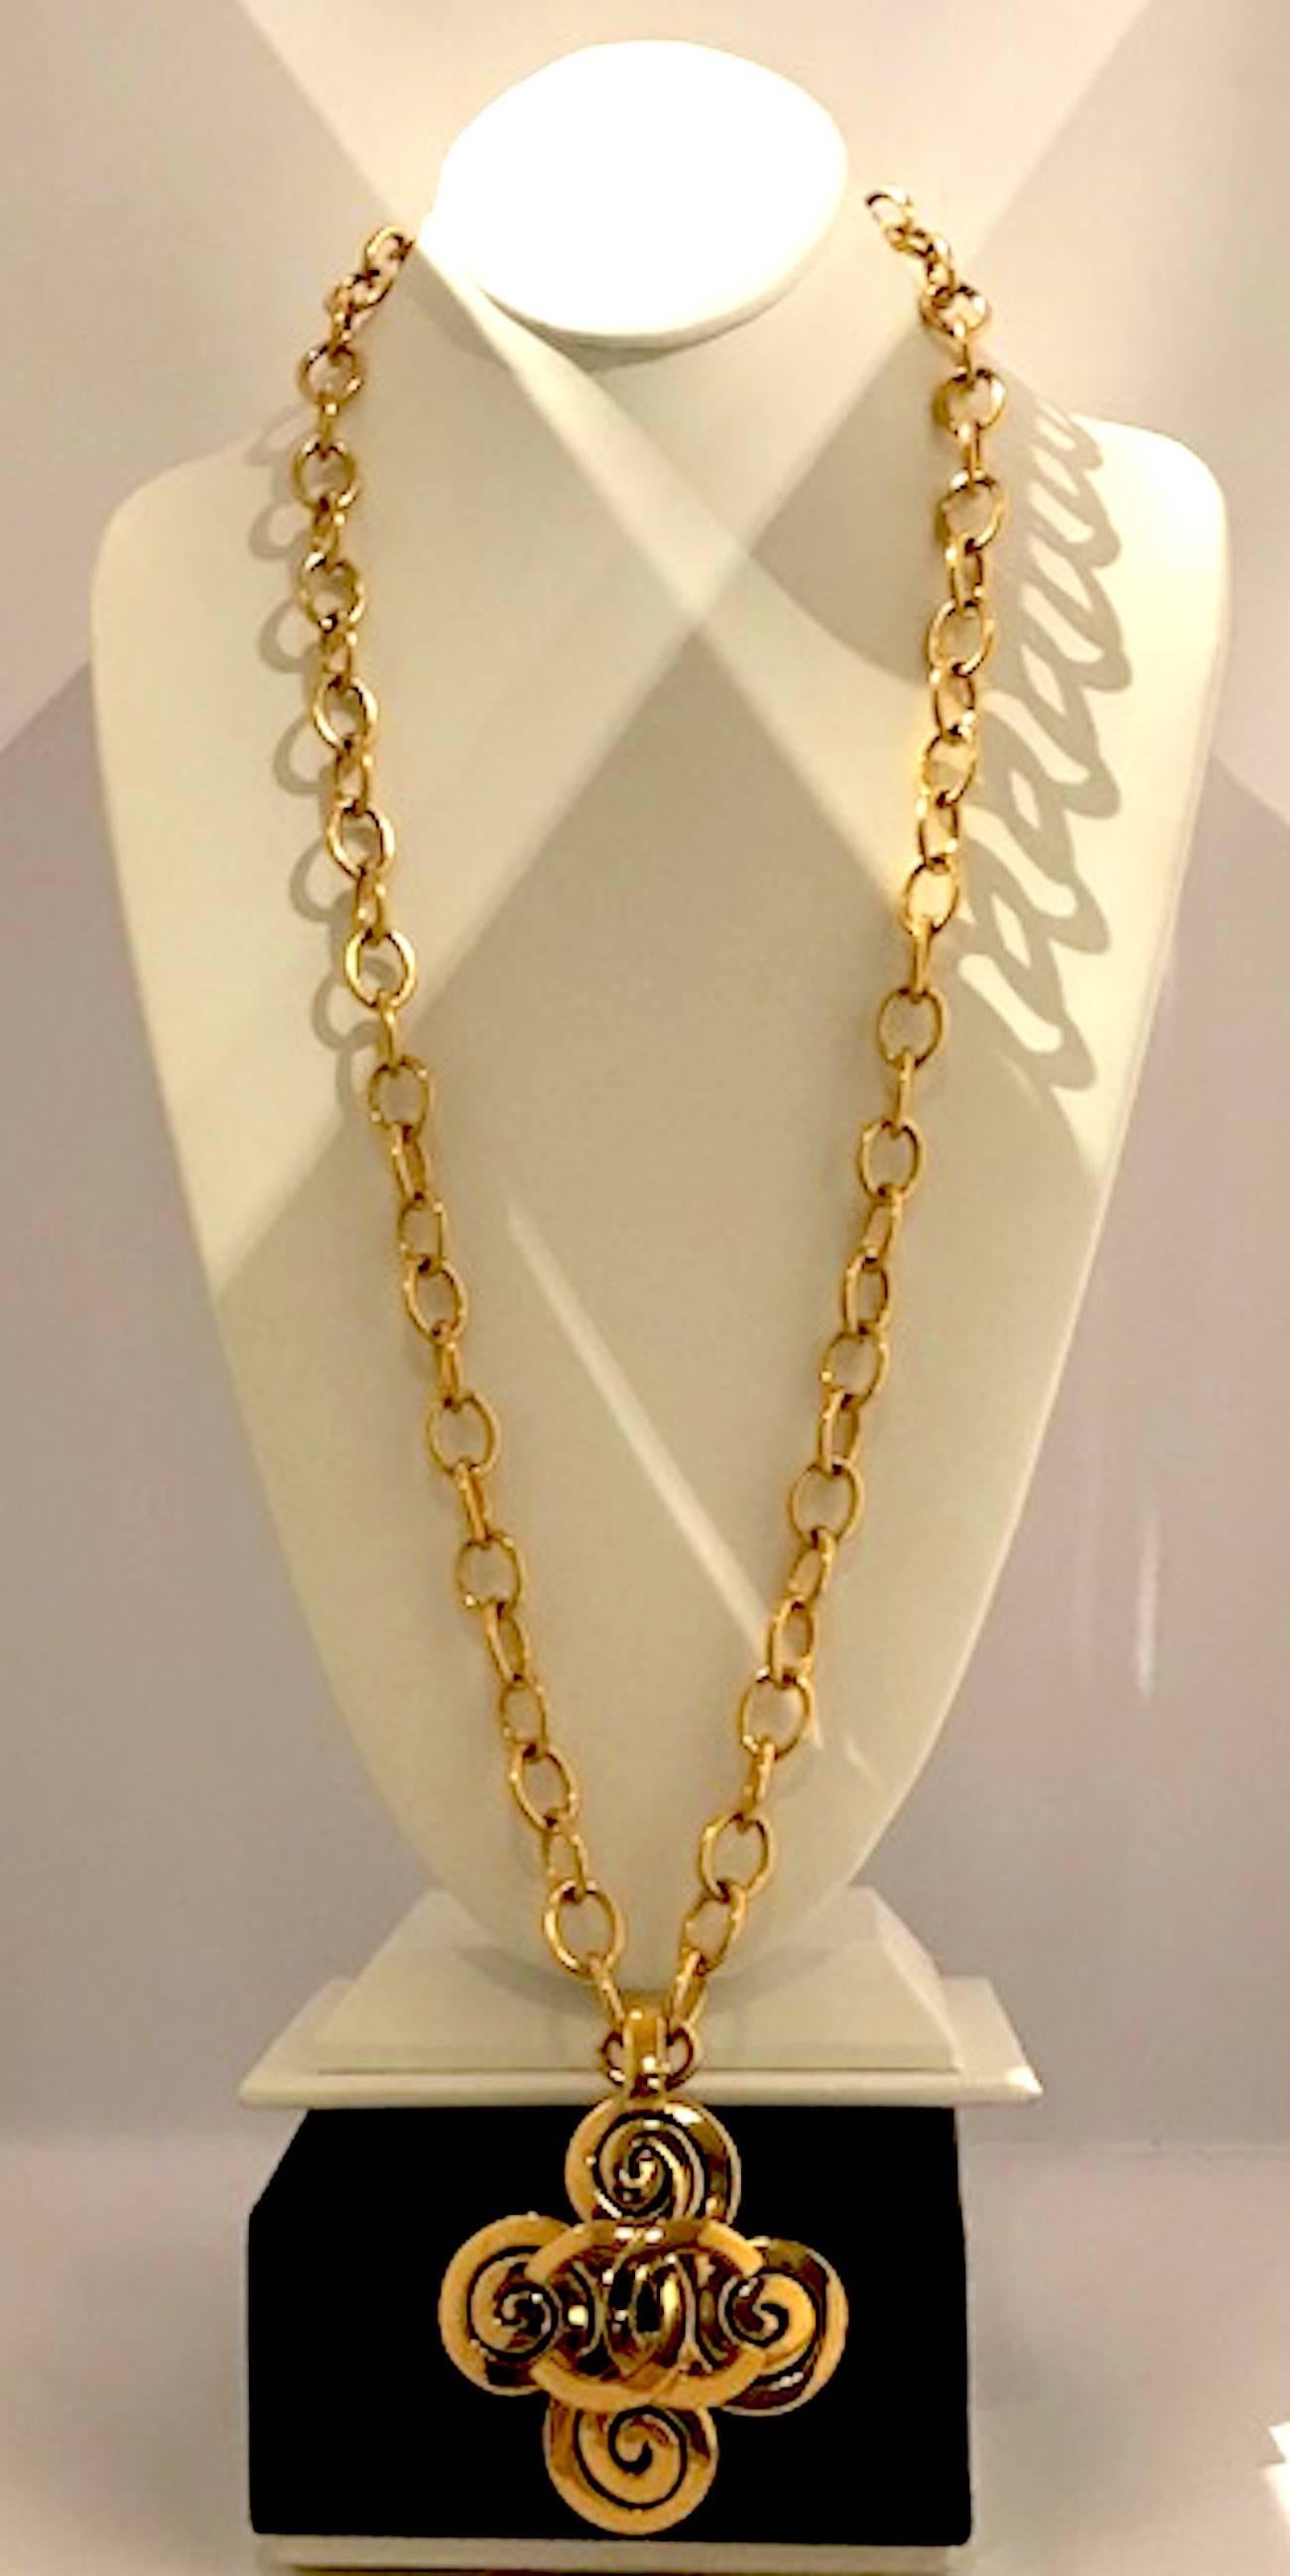 Presented is this lovely Chanel pendant necklace from the 1995 Spring Collection. It features a large 2.5